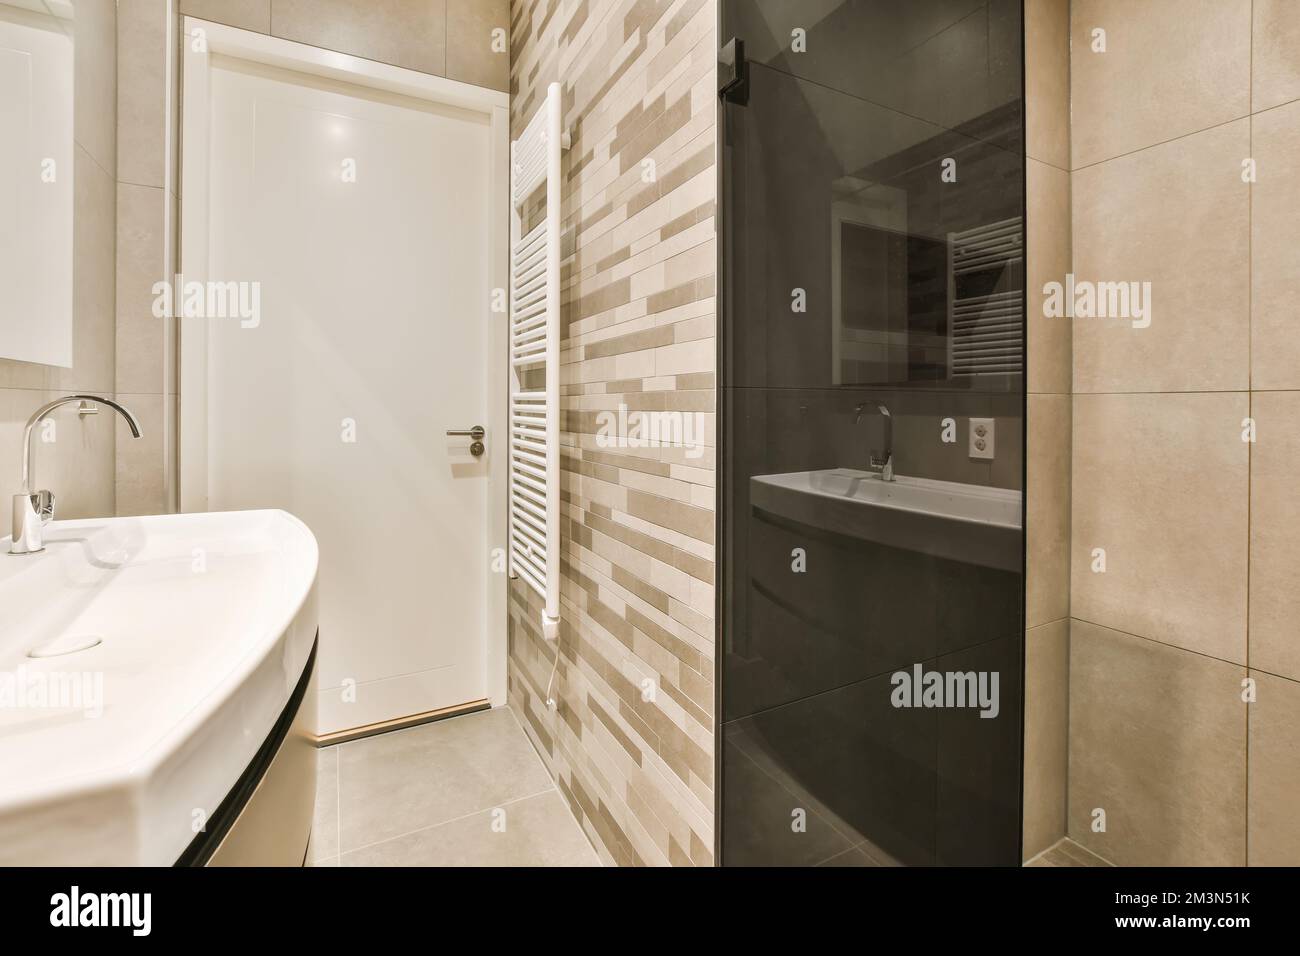 a bathroom that is very clean and ready to use as a shower stall or room divider for the toilet Stock Photo